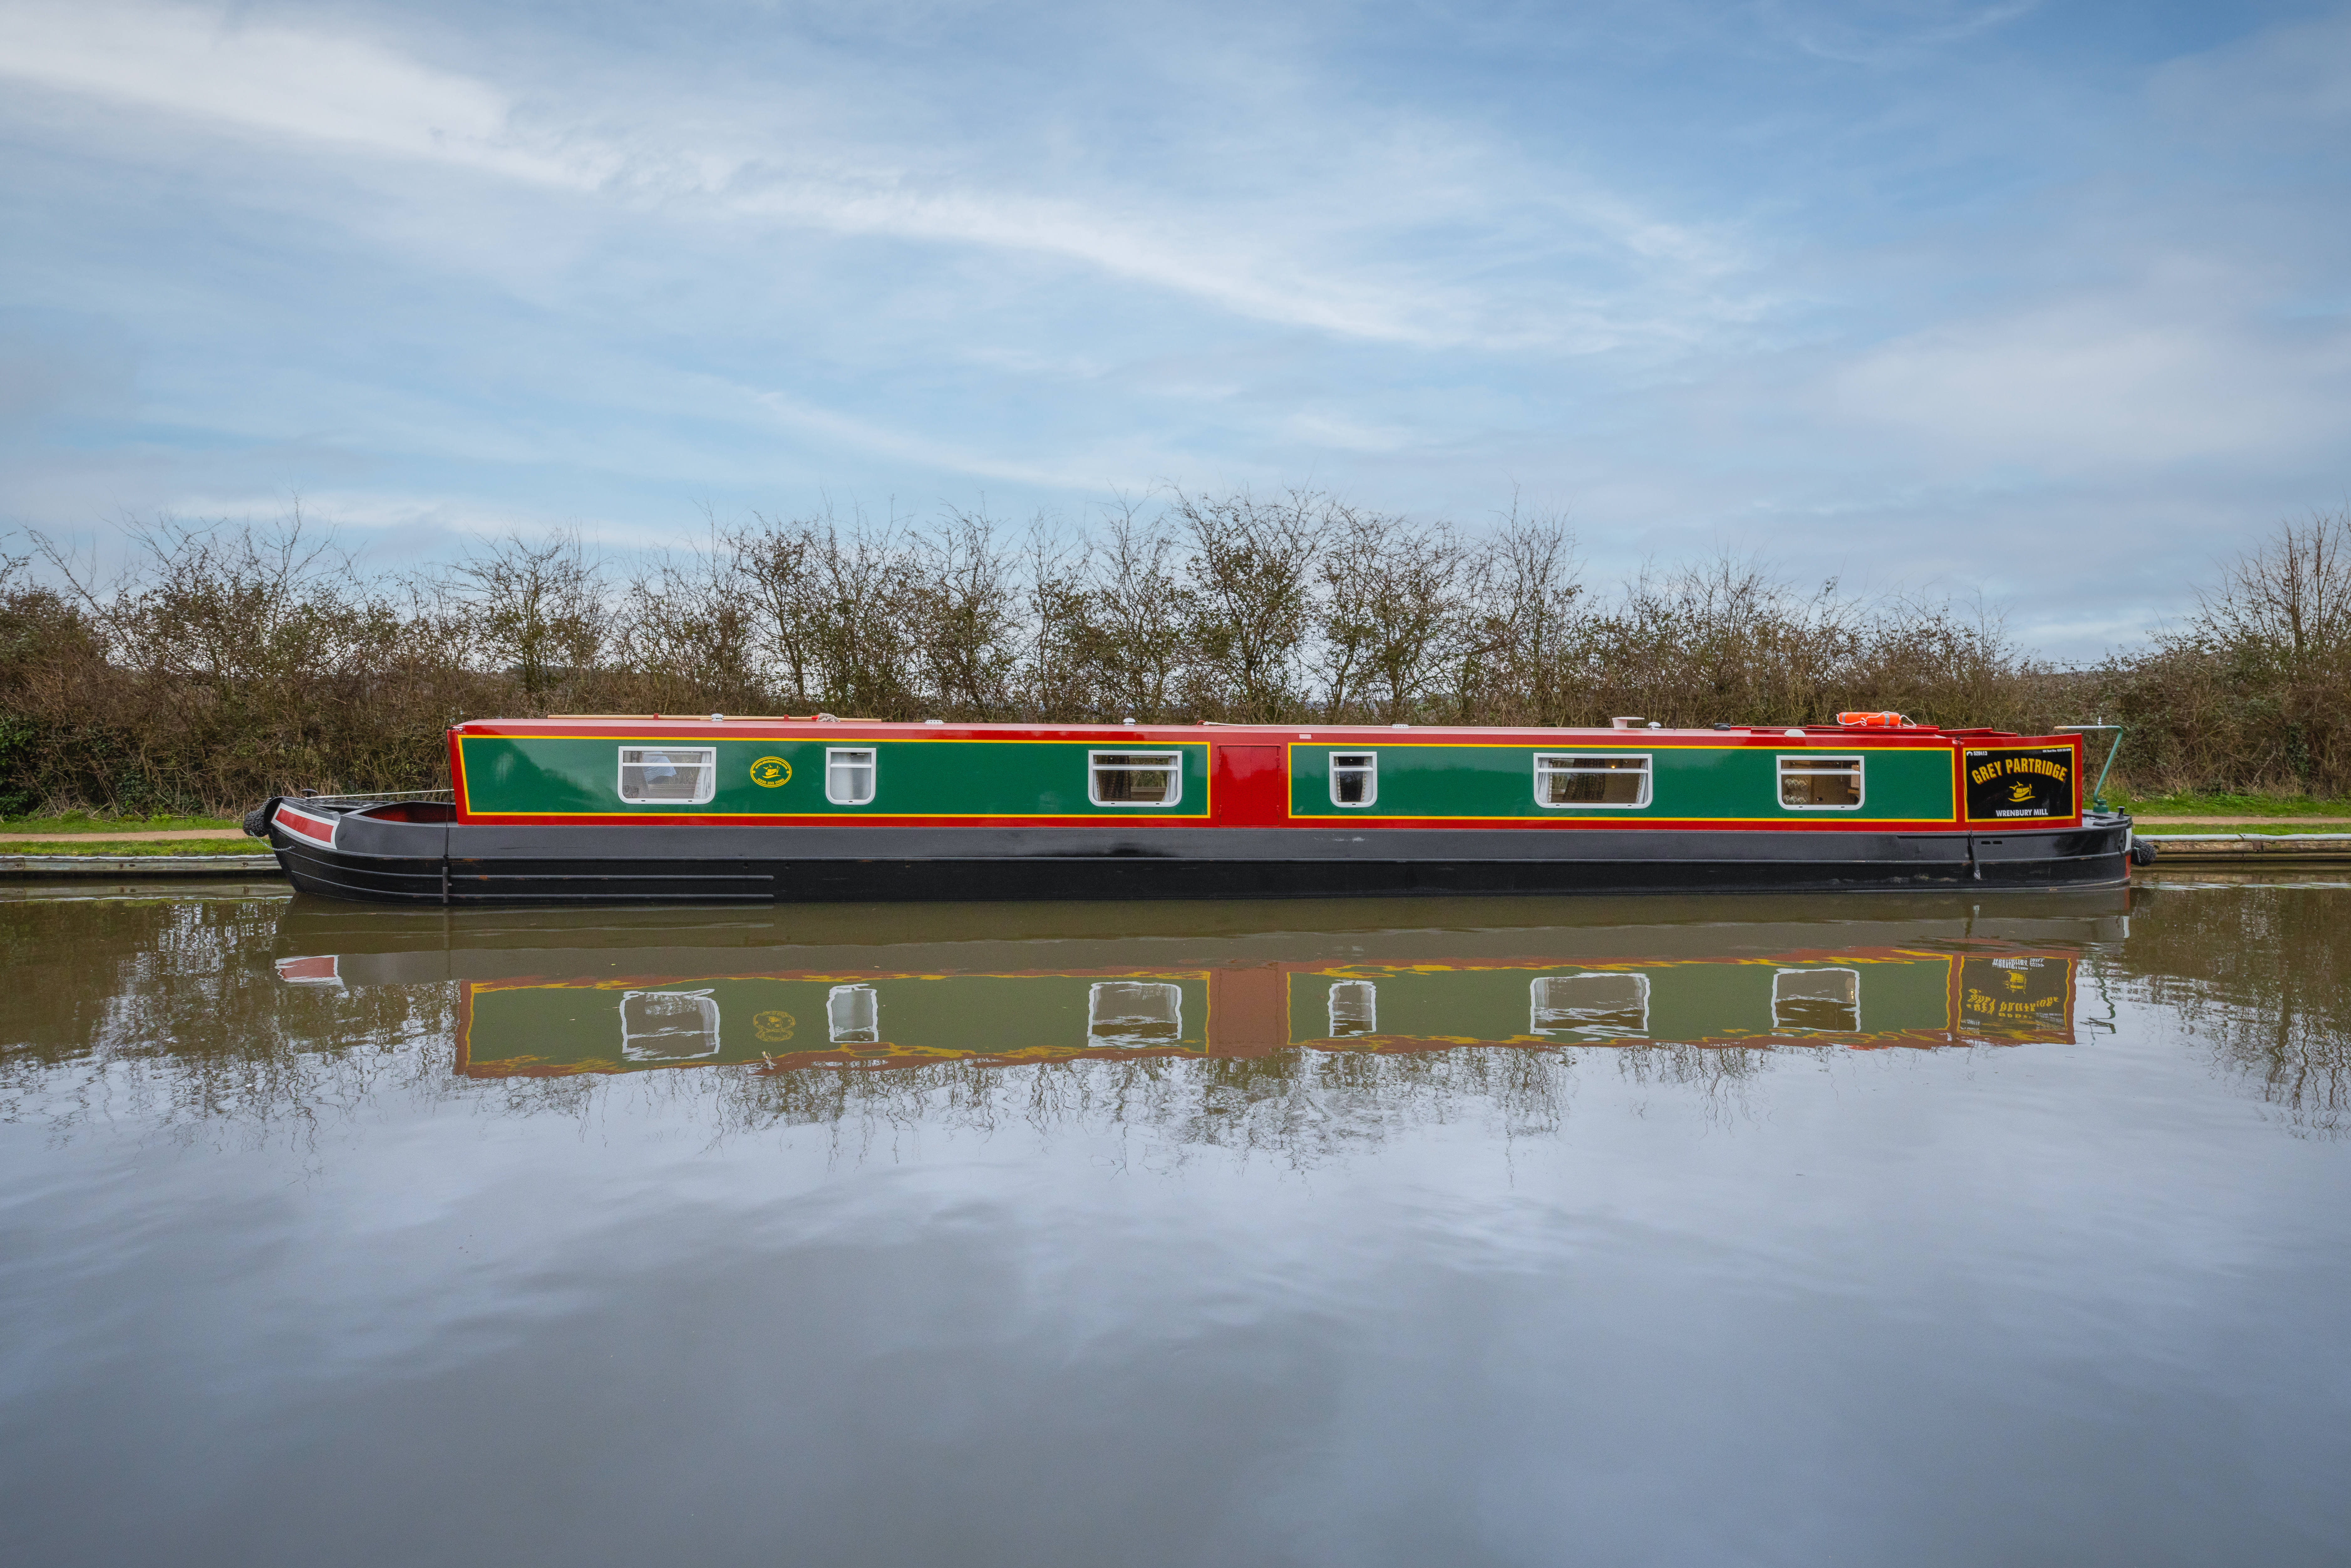 The Partridge class canal boat